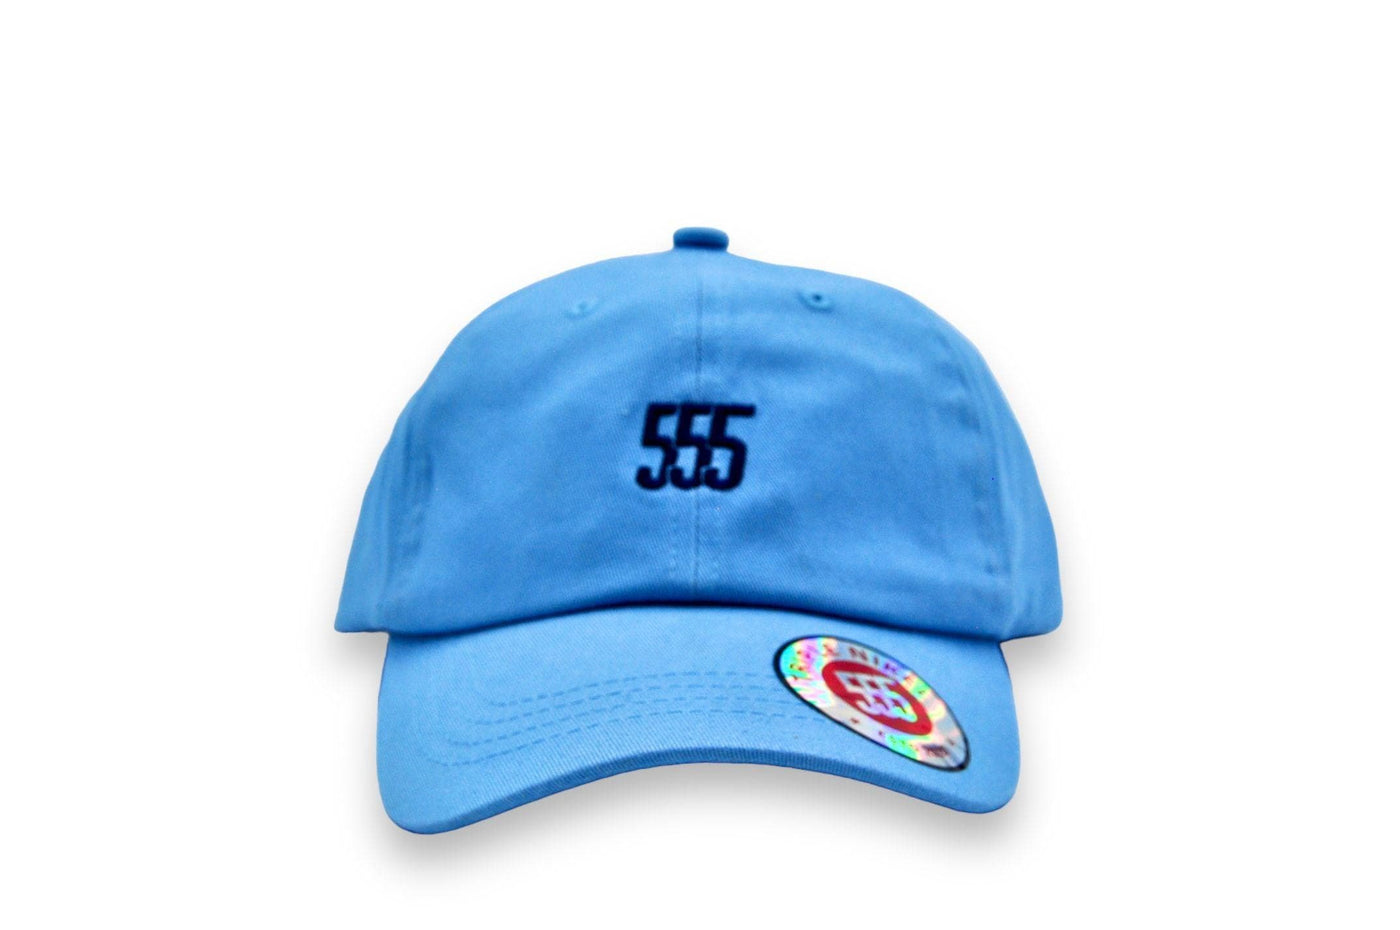 Triple Nikel Hats ONE SIZE FITS ALL / Blue / Team Gear Triple Nikel Accessory UNISEX Chino Twill Hat